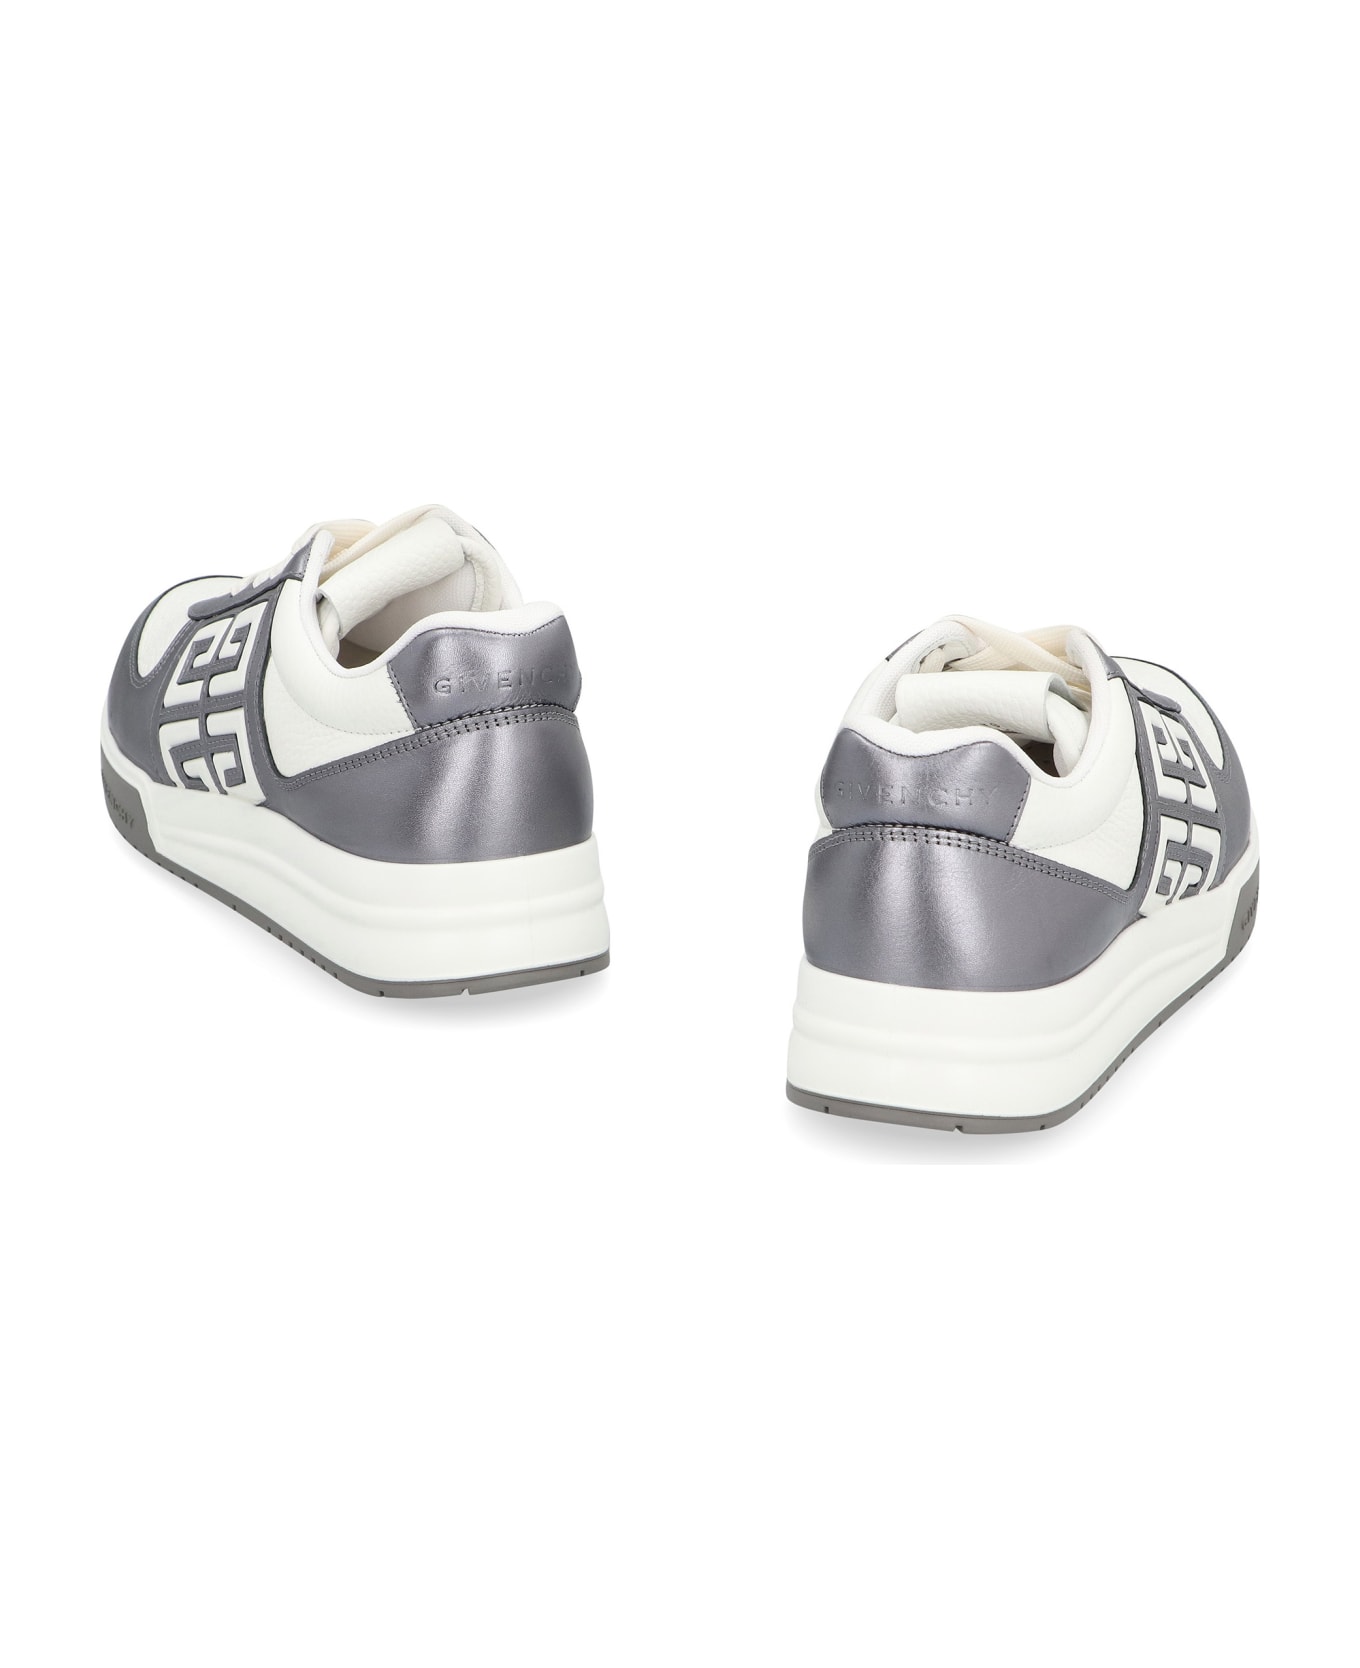 Givenchy G4 Woman's Sneakers - White